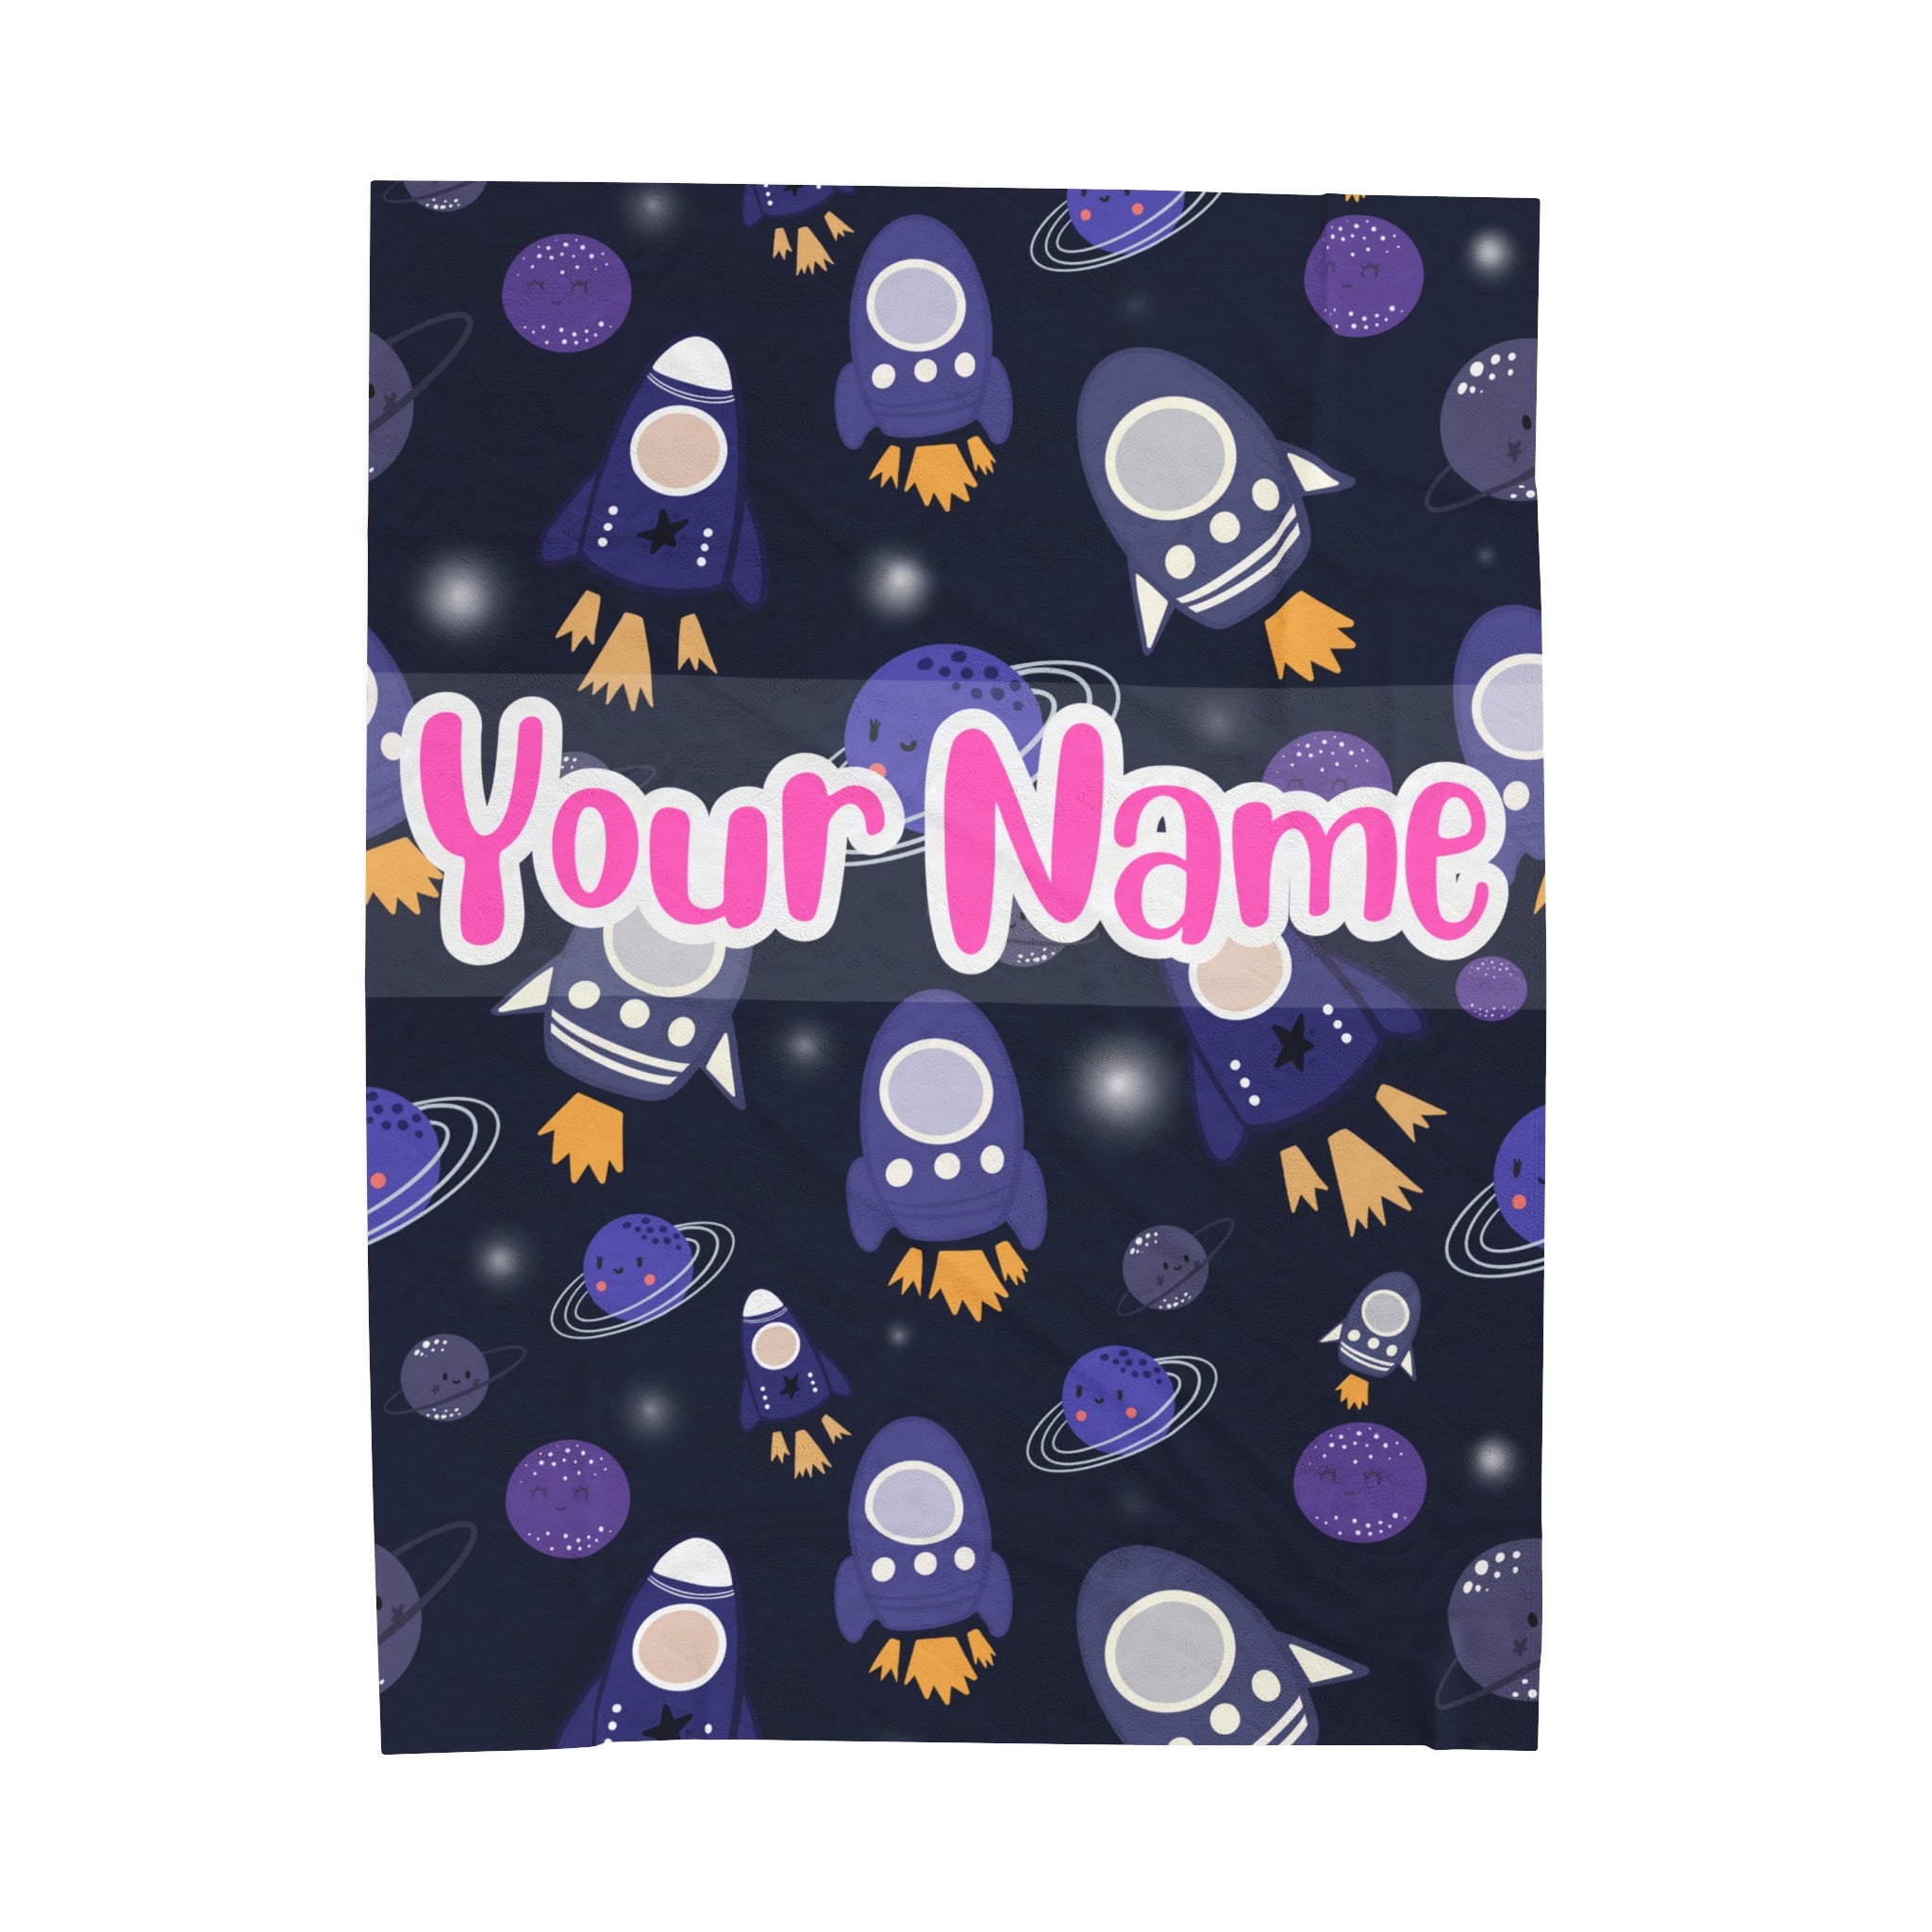 Funny Space Blanket #7 Custom Blanket with Name - Personalized Blanket